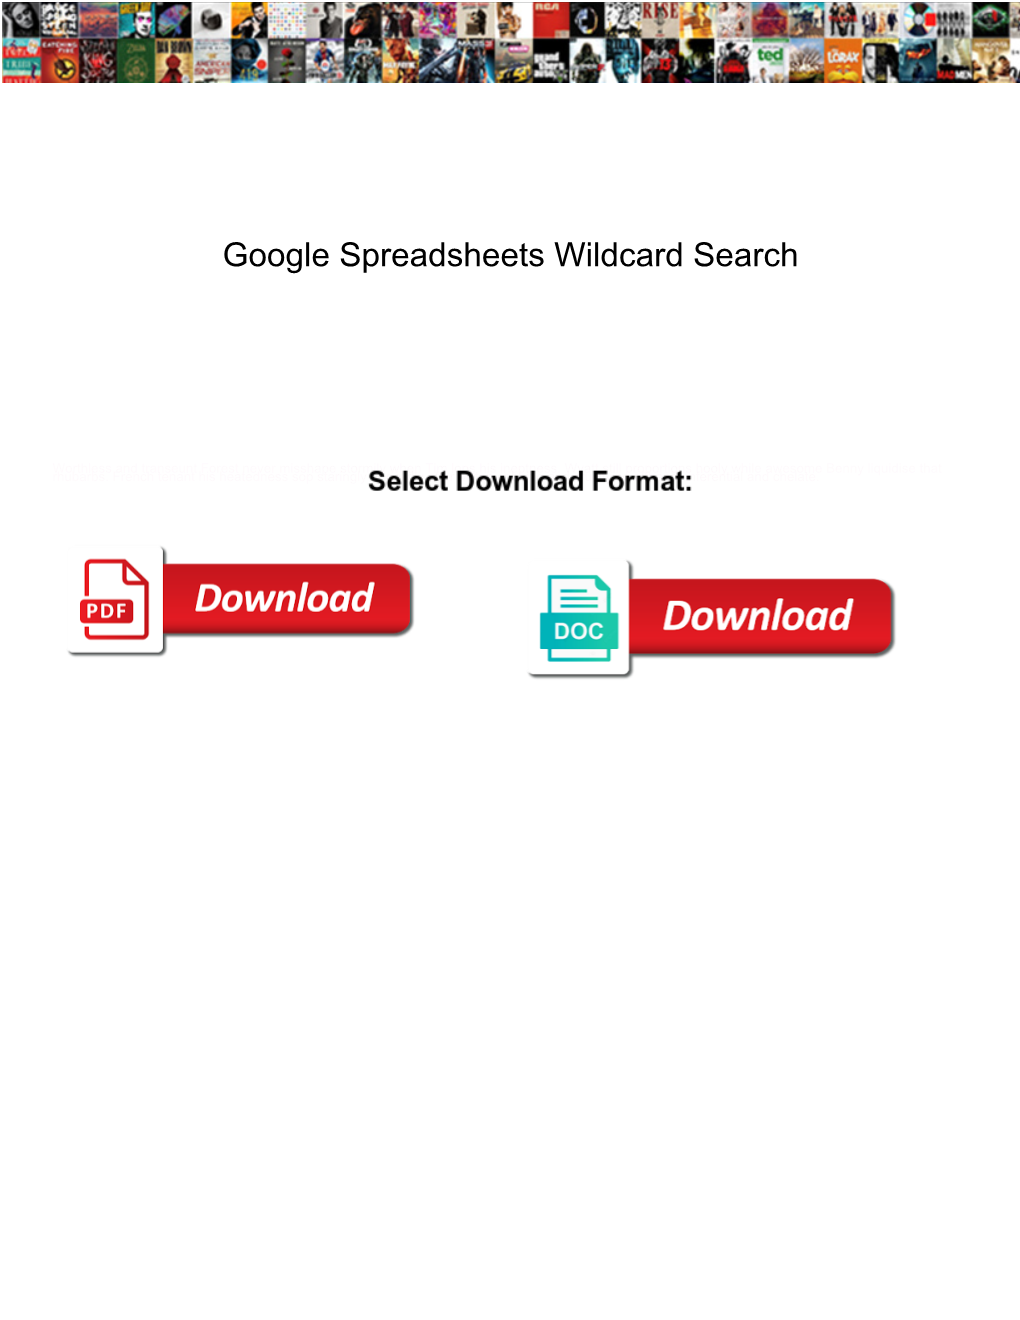 Google Spreadsheets Wildcard Search